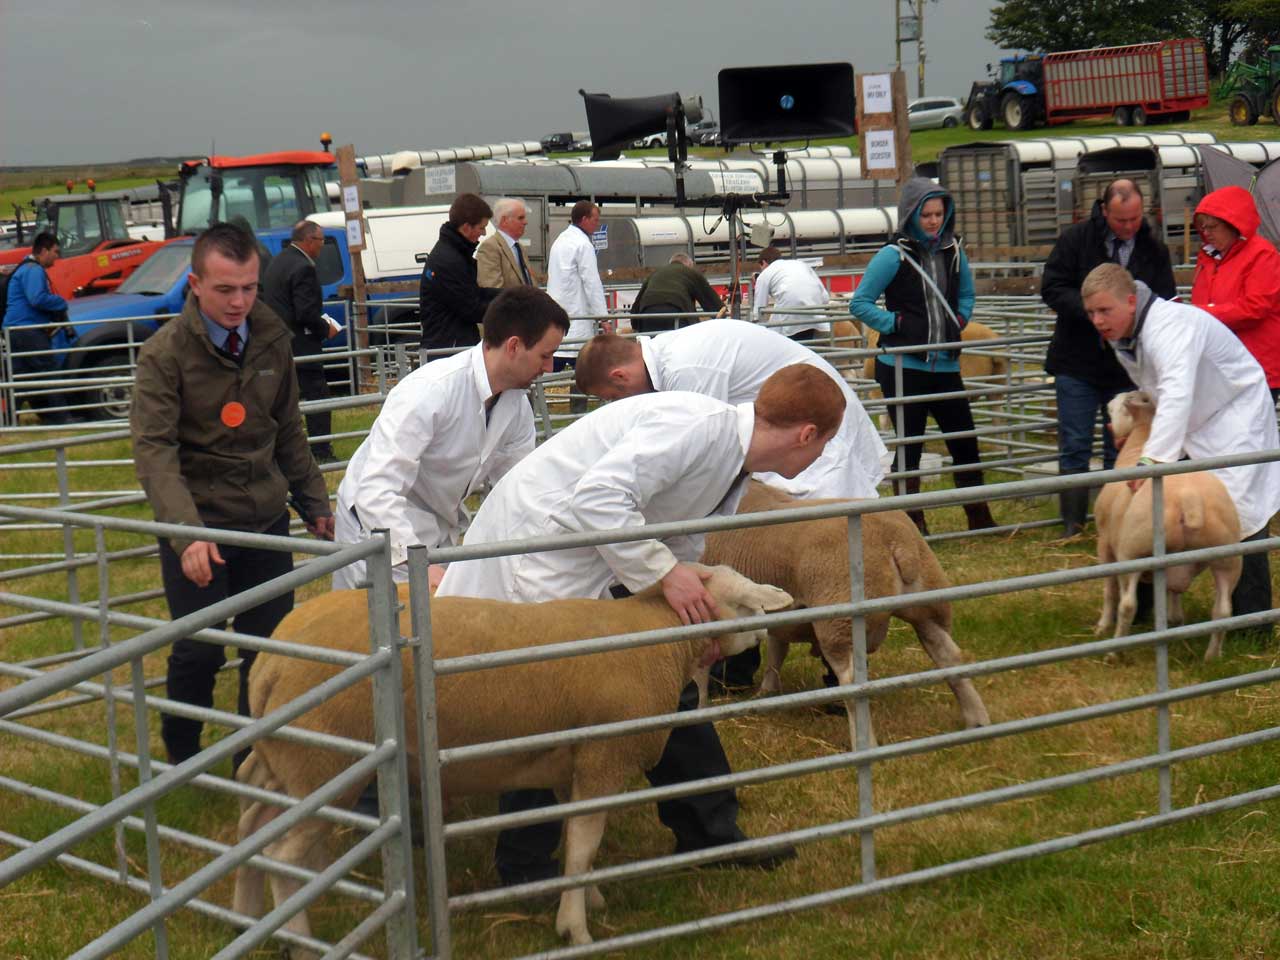 Photo: Caithness County Show 2017 - Saturday